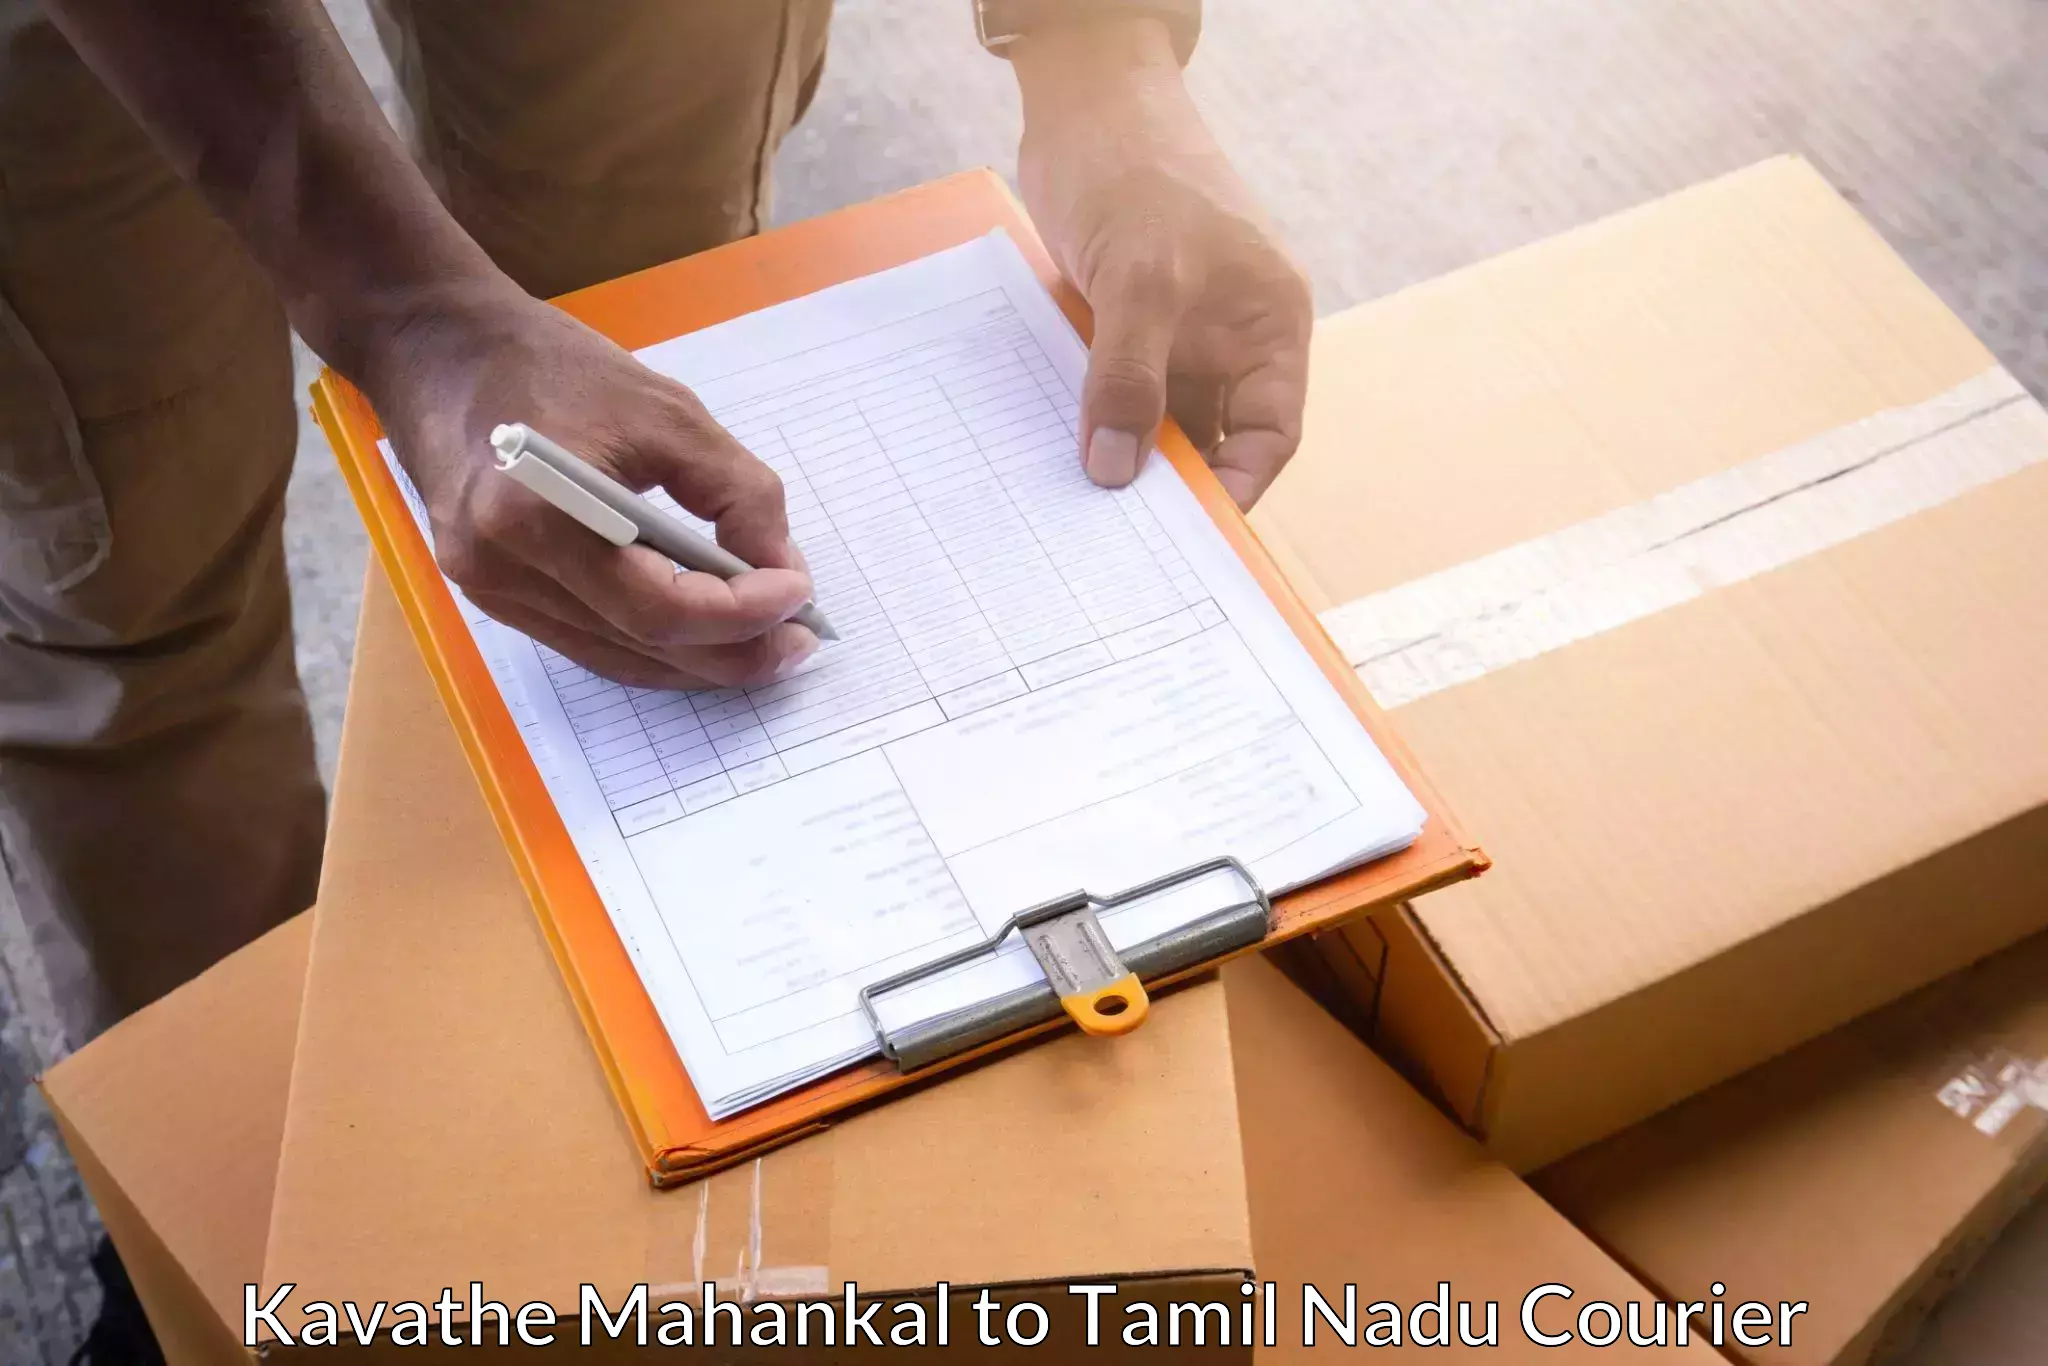 Courier tracking online Kavathe Mahankal to Surandai